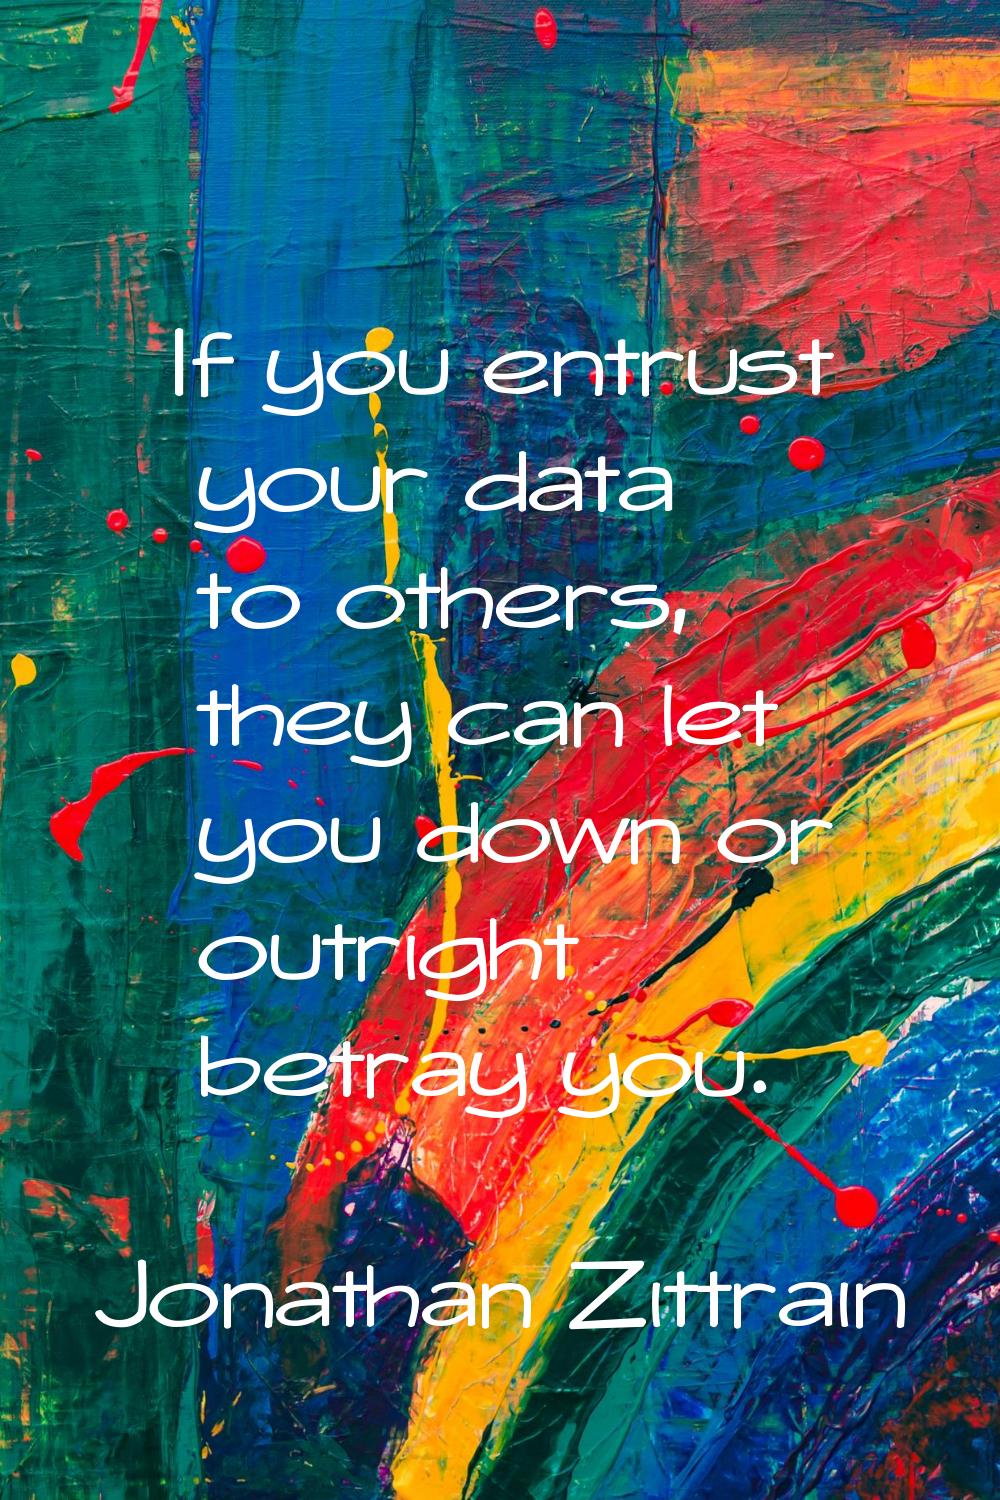 If you entrust your data to others, they can let you down or outright betray you.